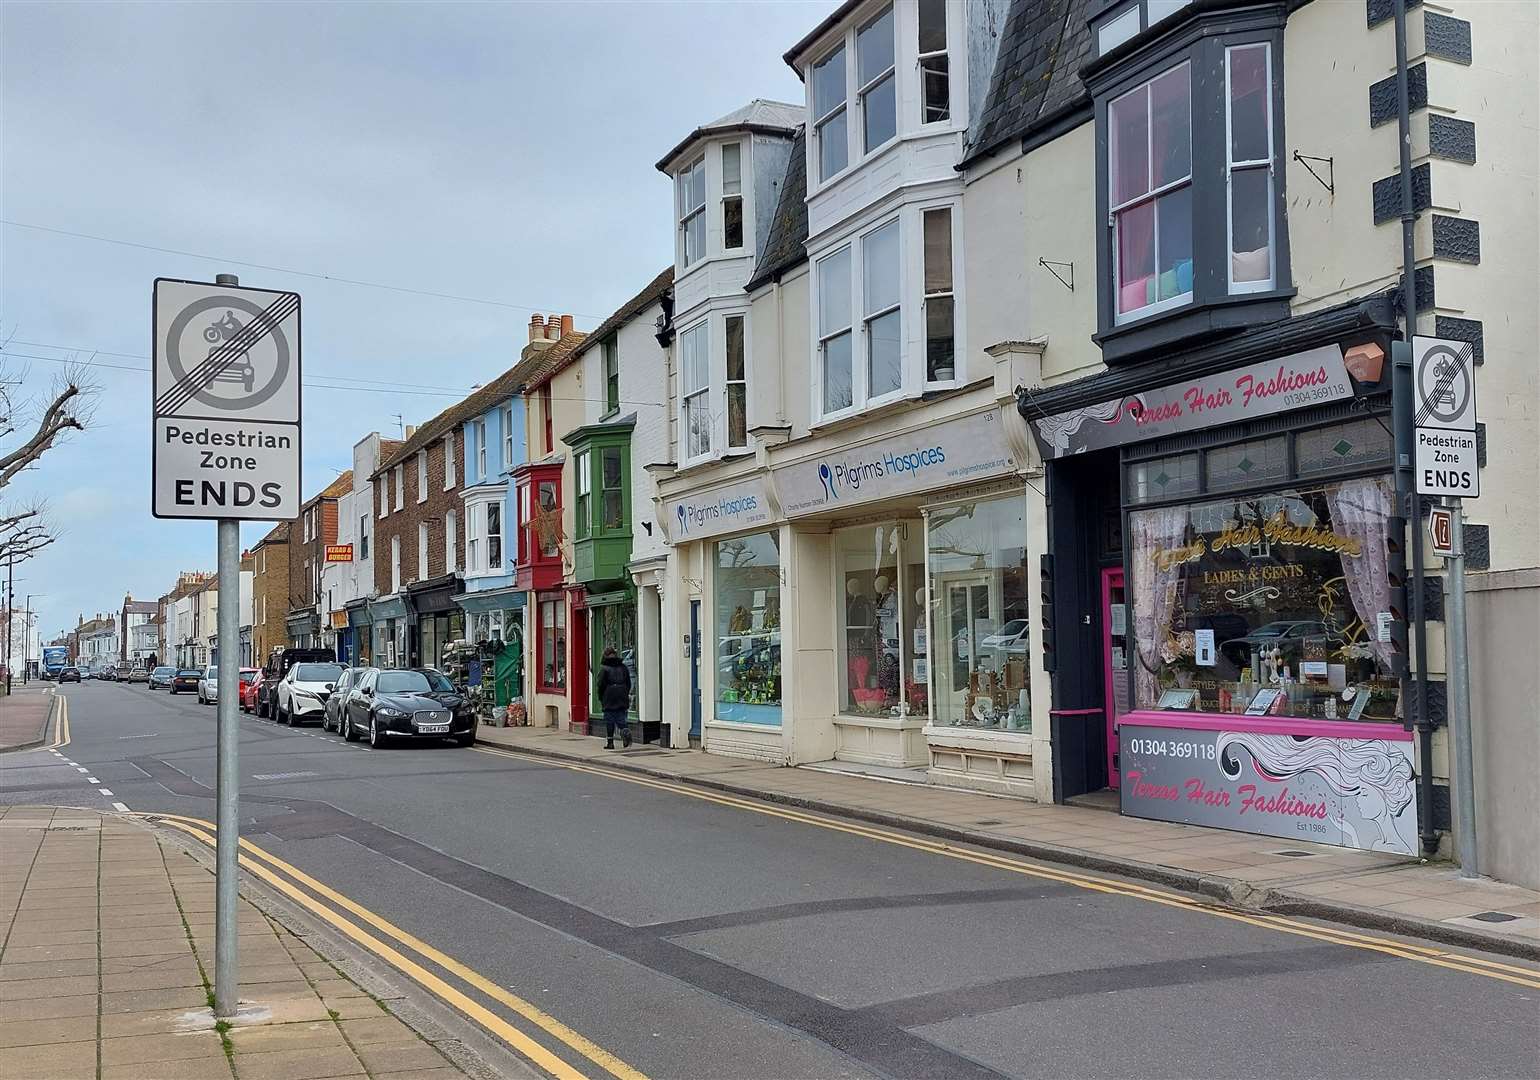 The north section of Deal High Street, from Stanhope Road and Union Road, is currently pedestrianised from 10am until 2pm on Saturdays only